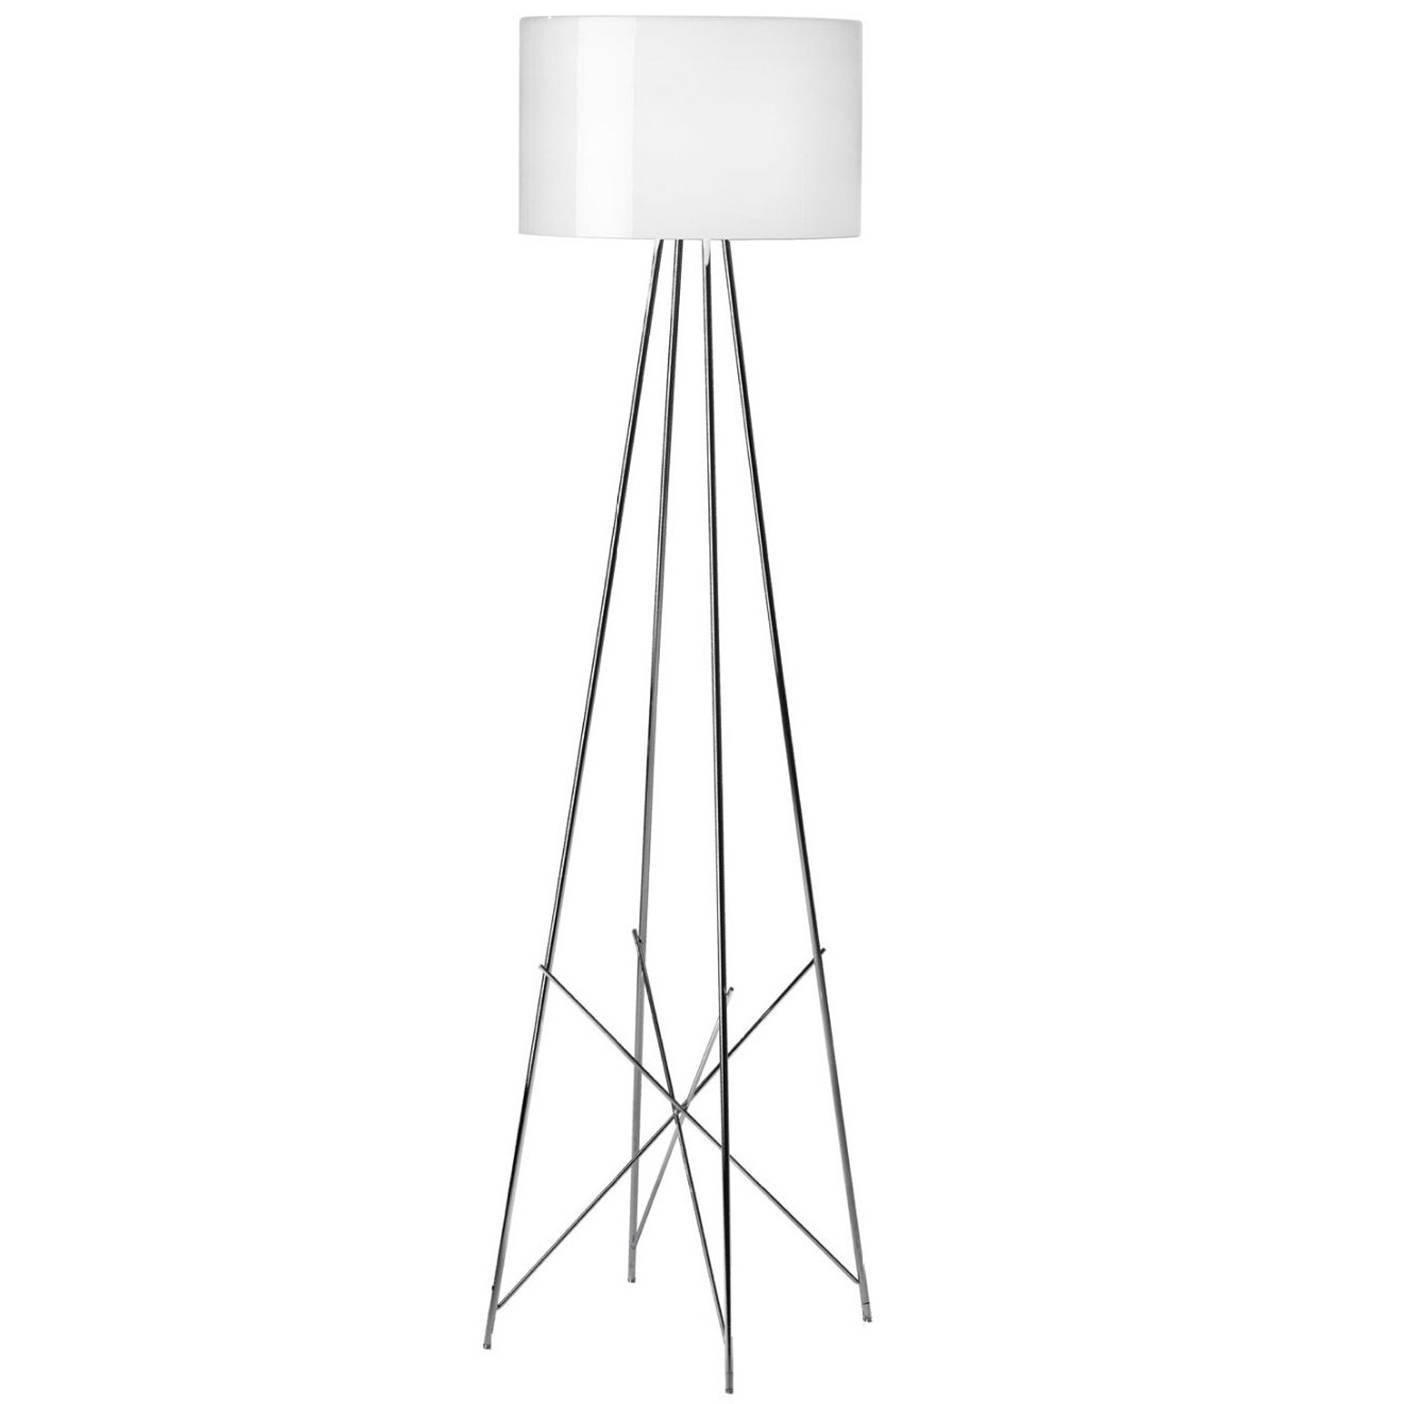 White Shade Ray F2 Floor Lamp by Rodolfo Dordoni for Flos, Italy Modern Light For Sale